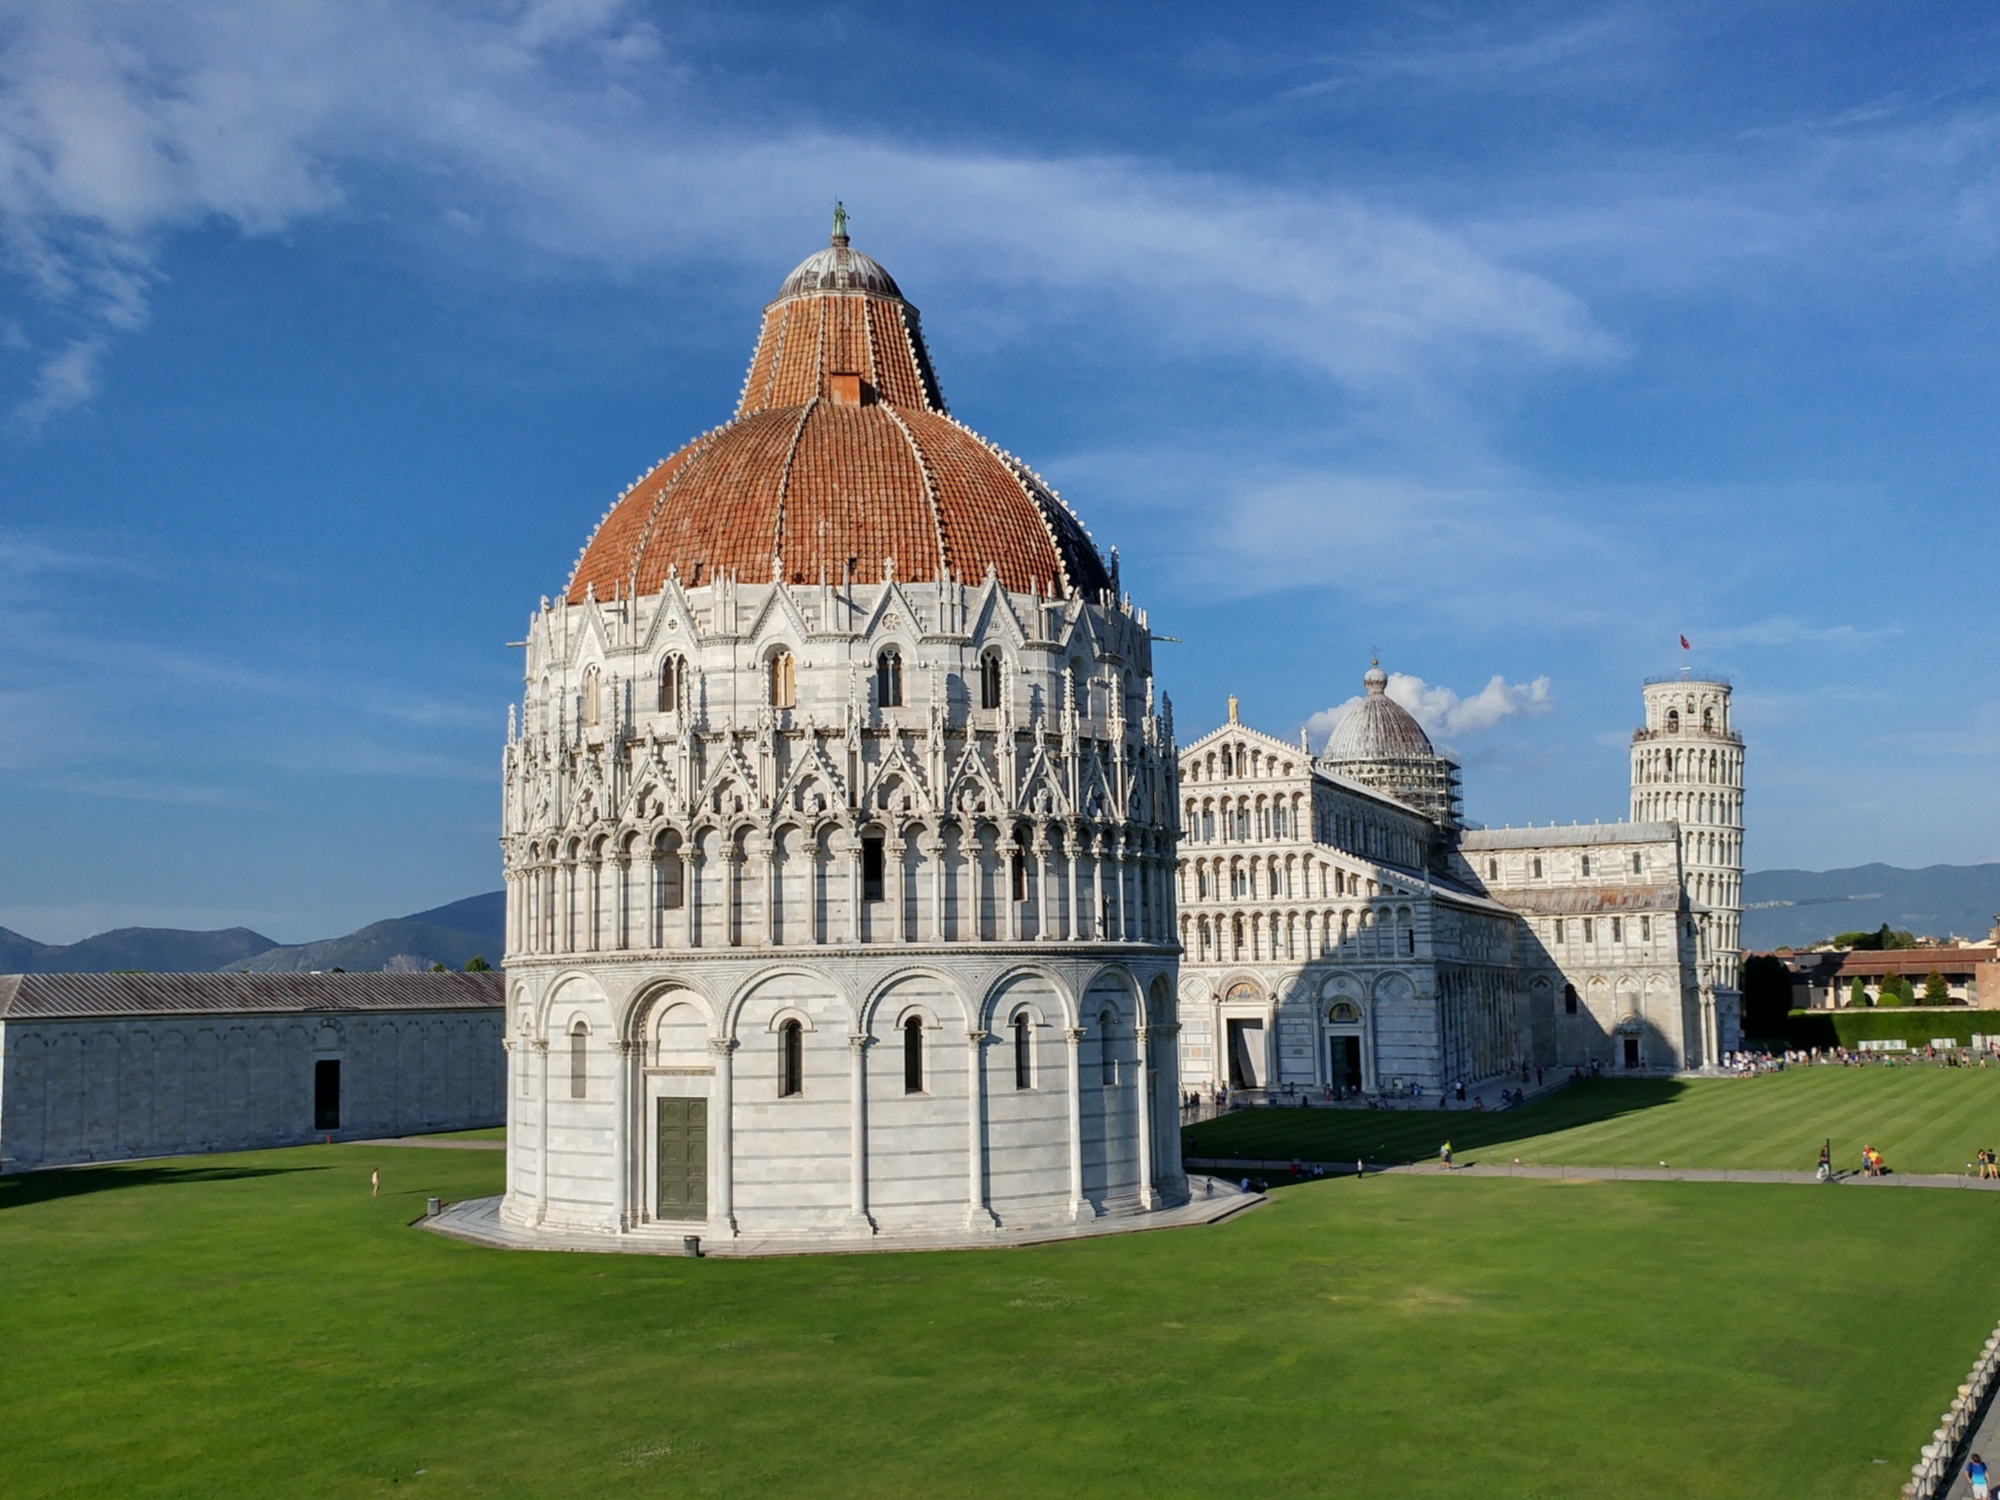 from the walls of Pisa